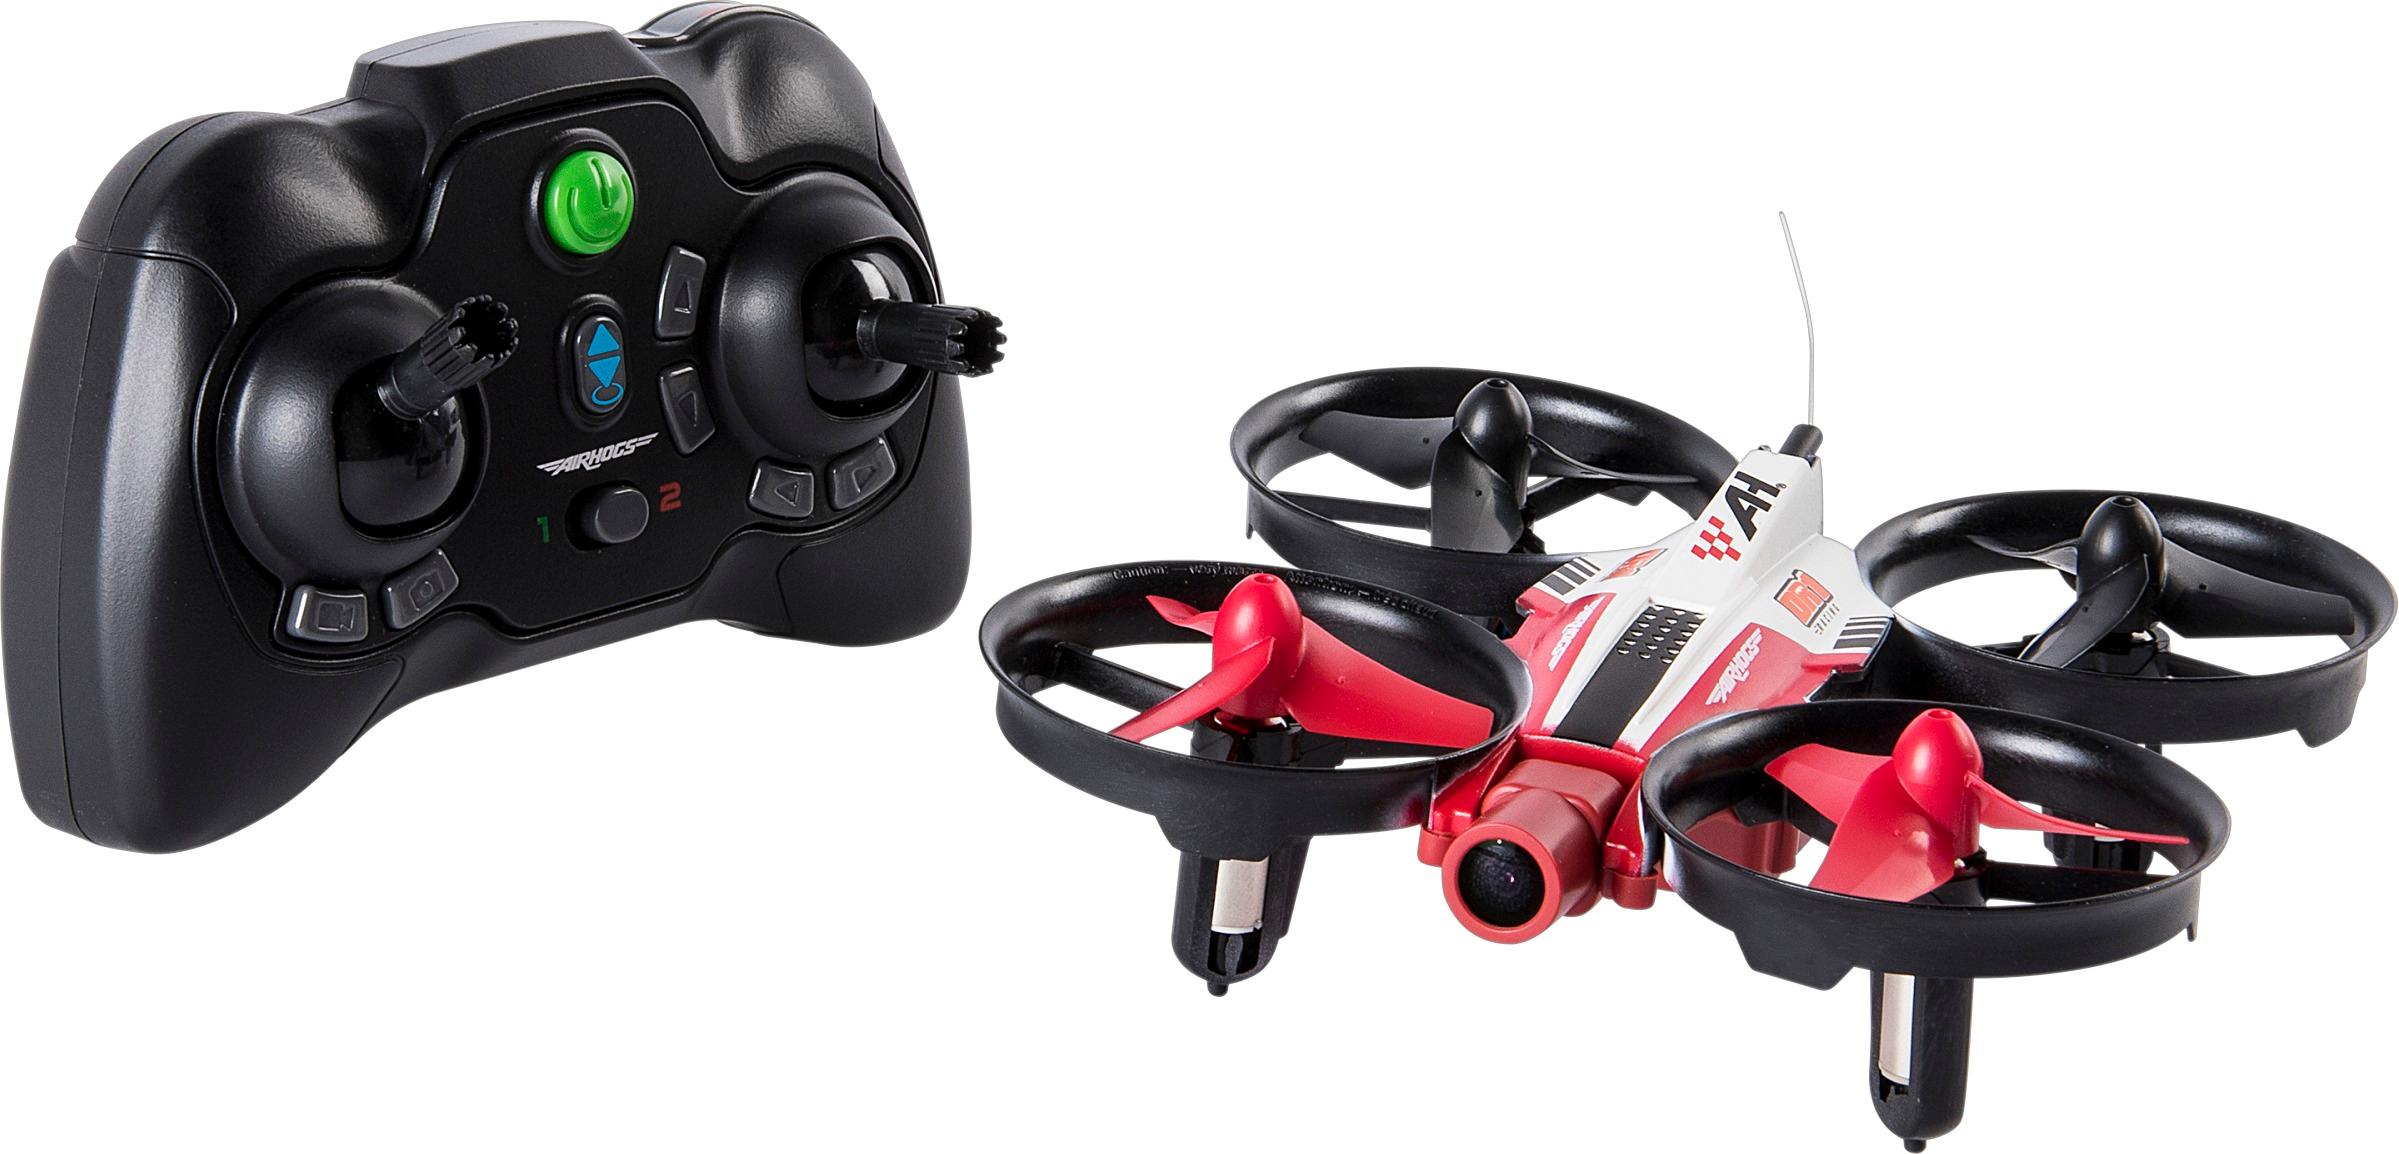 Air Hogs 6037679 Dr1 FPV Race Drone for sale online 